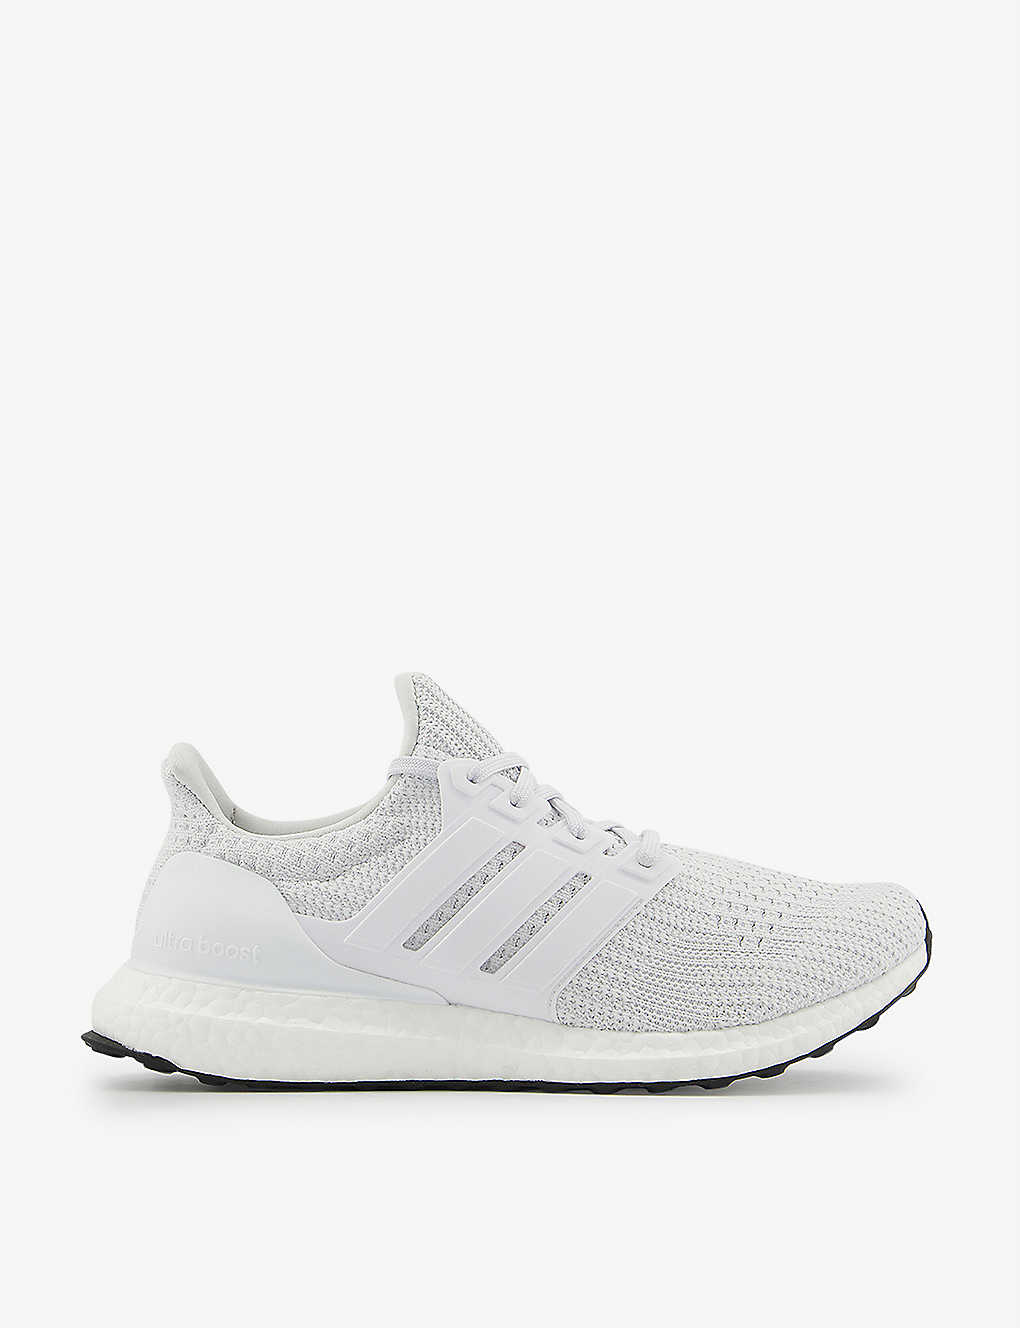 UltraBoost 4.0 mid-top knitted trainers(9386508)